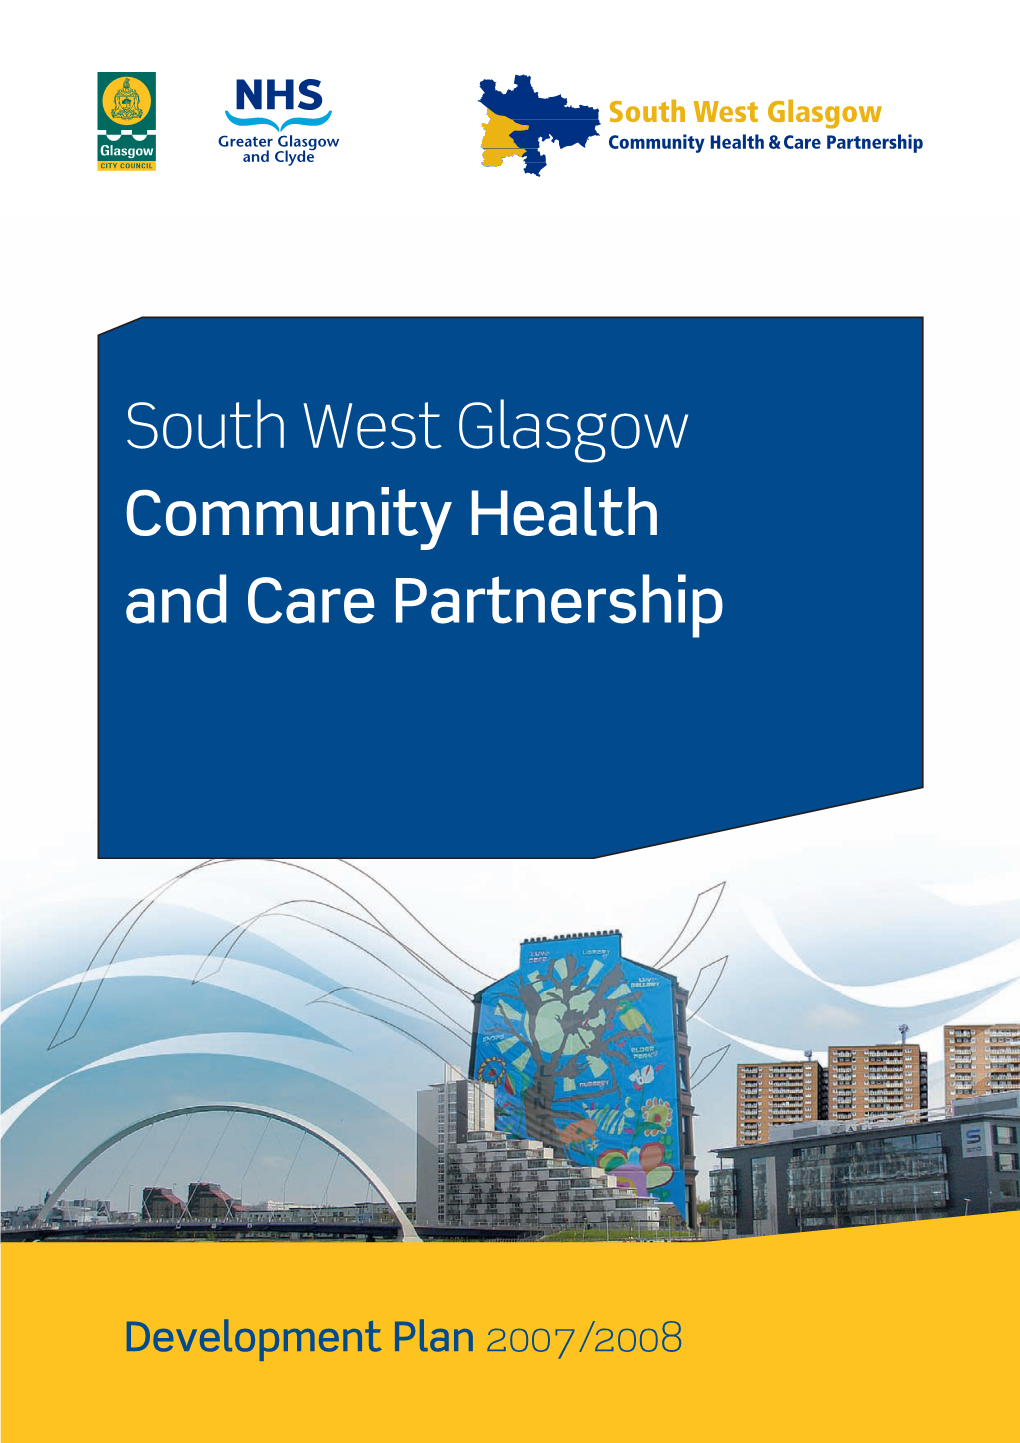 South West Glasgow Community Health and Care Partnership